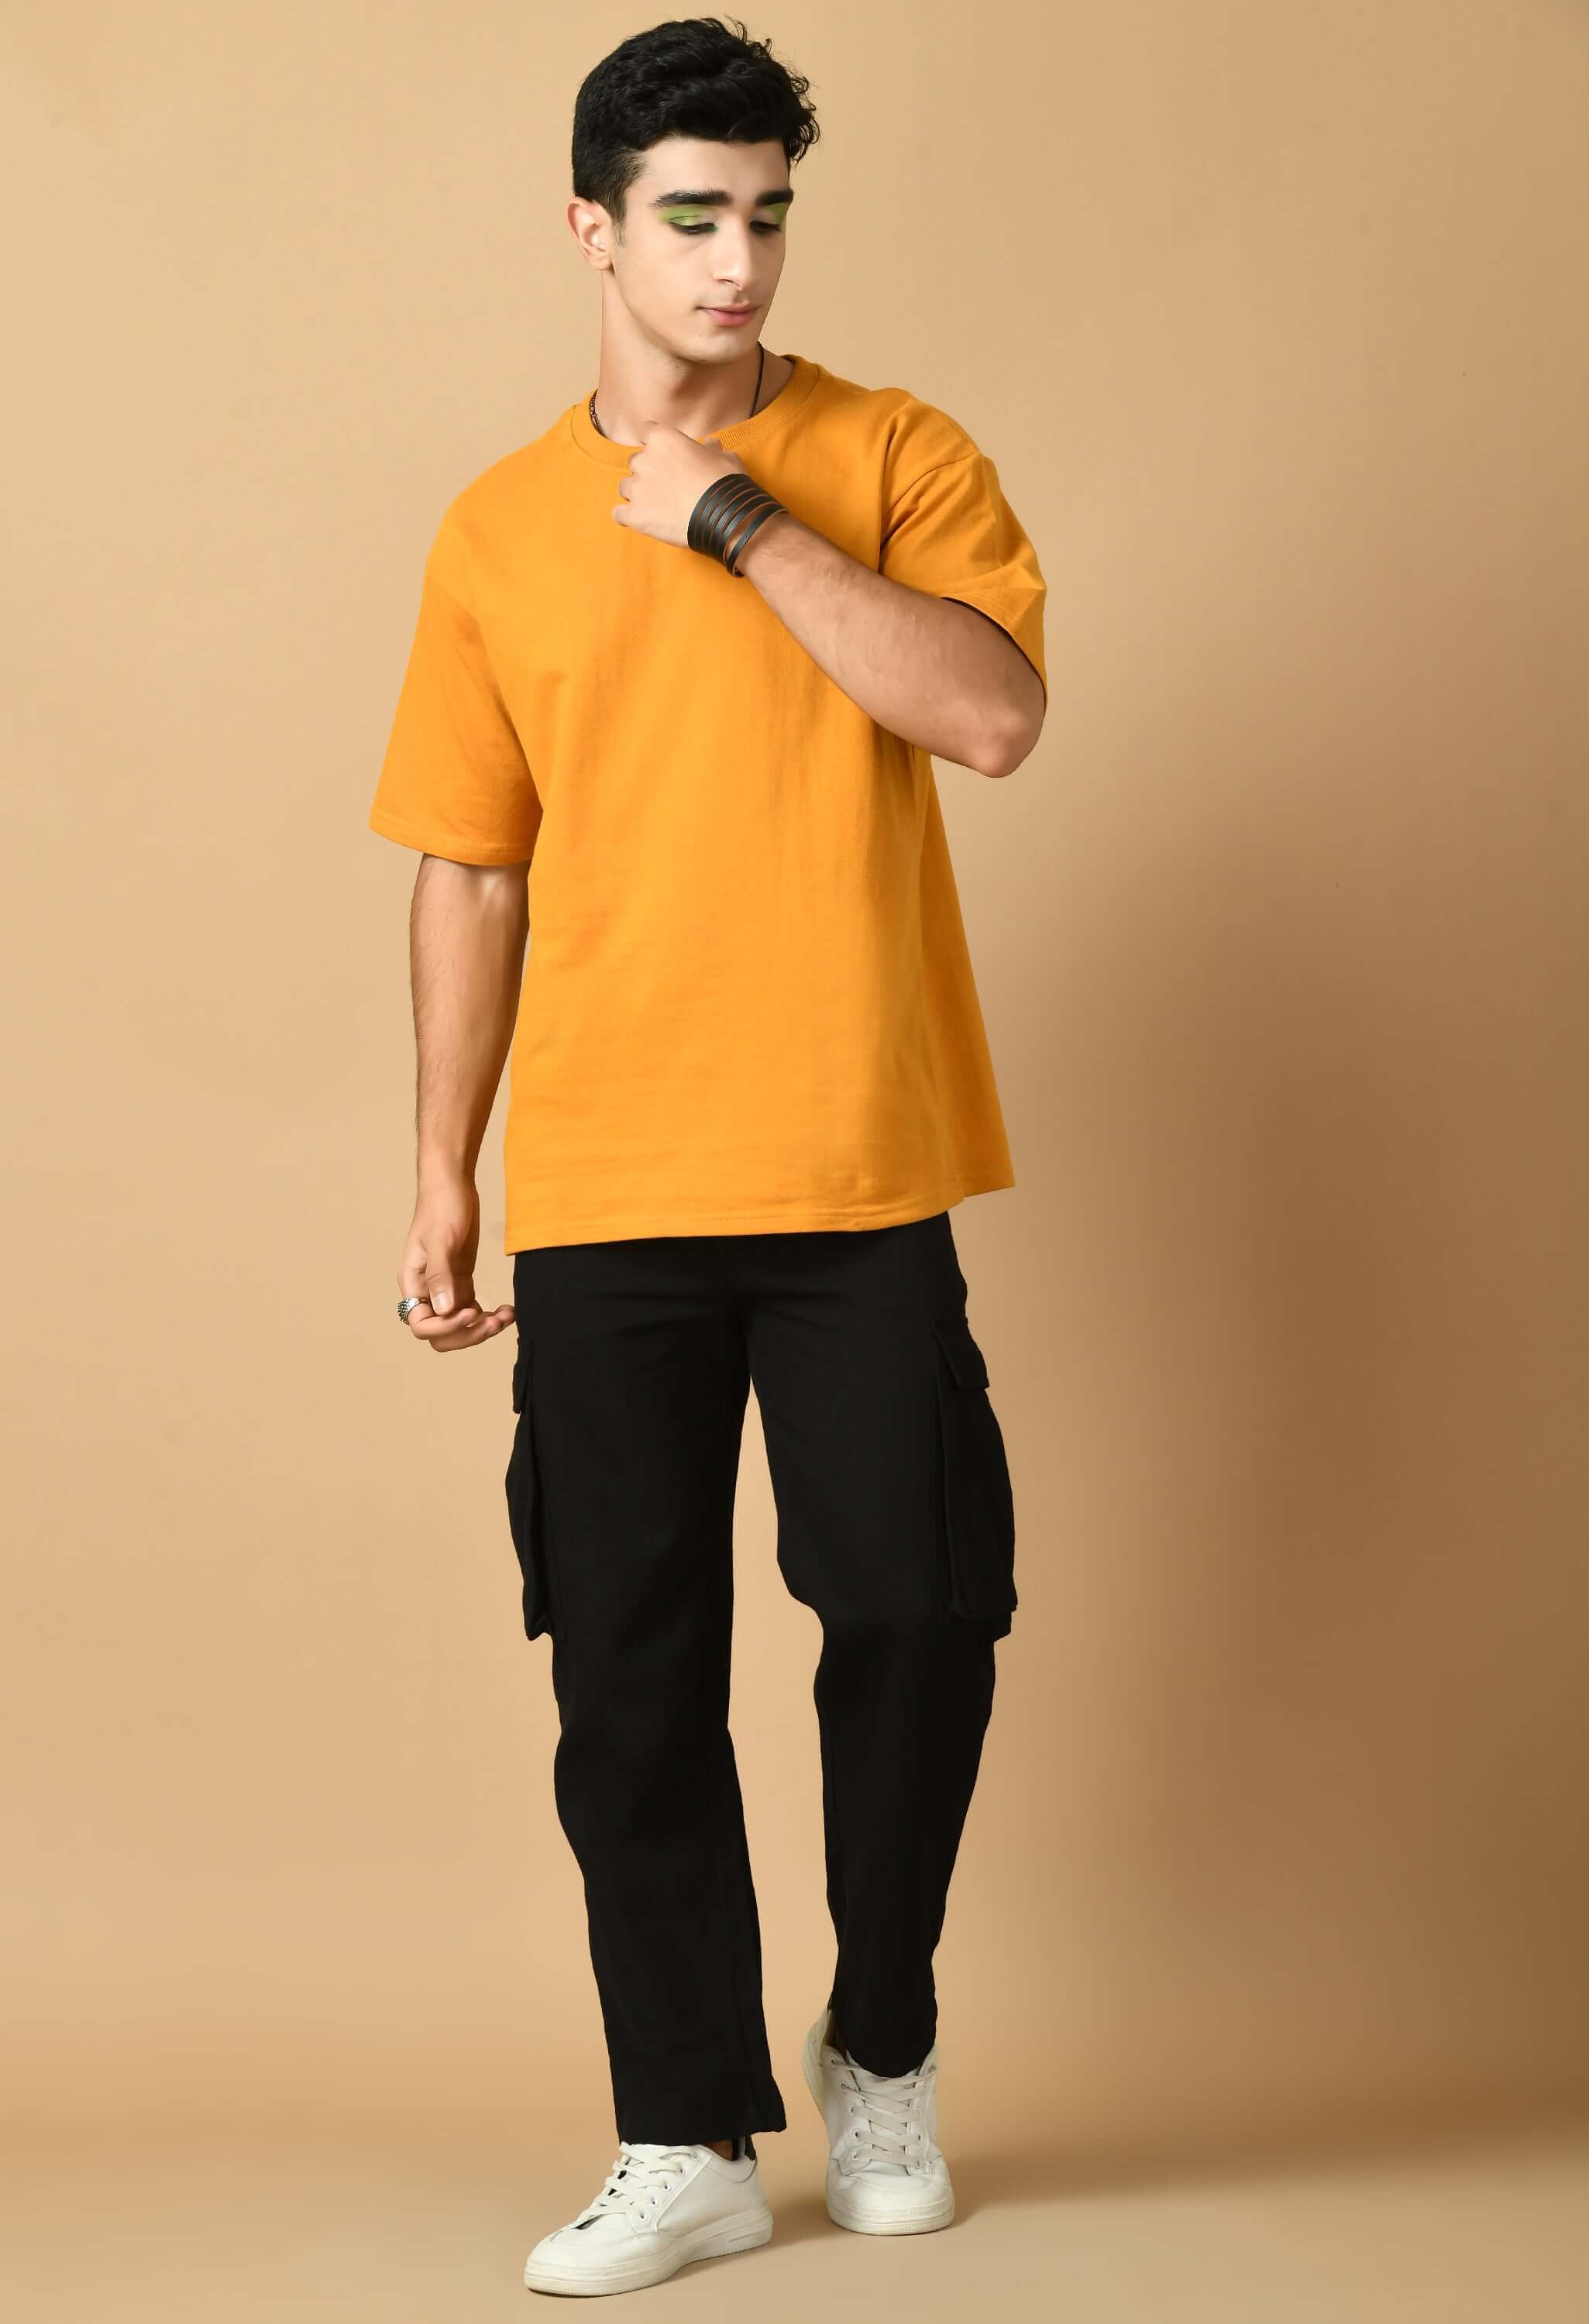 Revolution printed mustard color oversized t-shirt by offmint